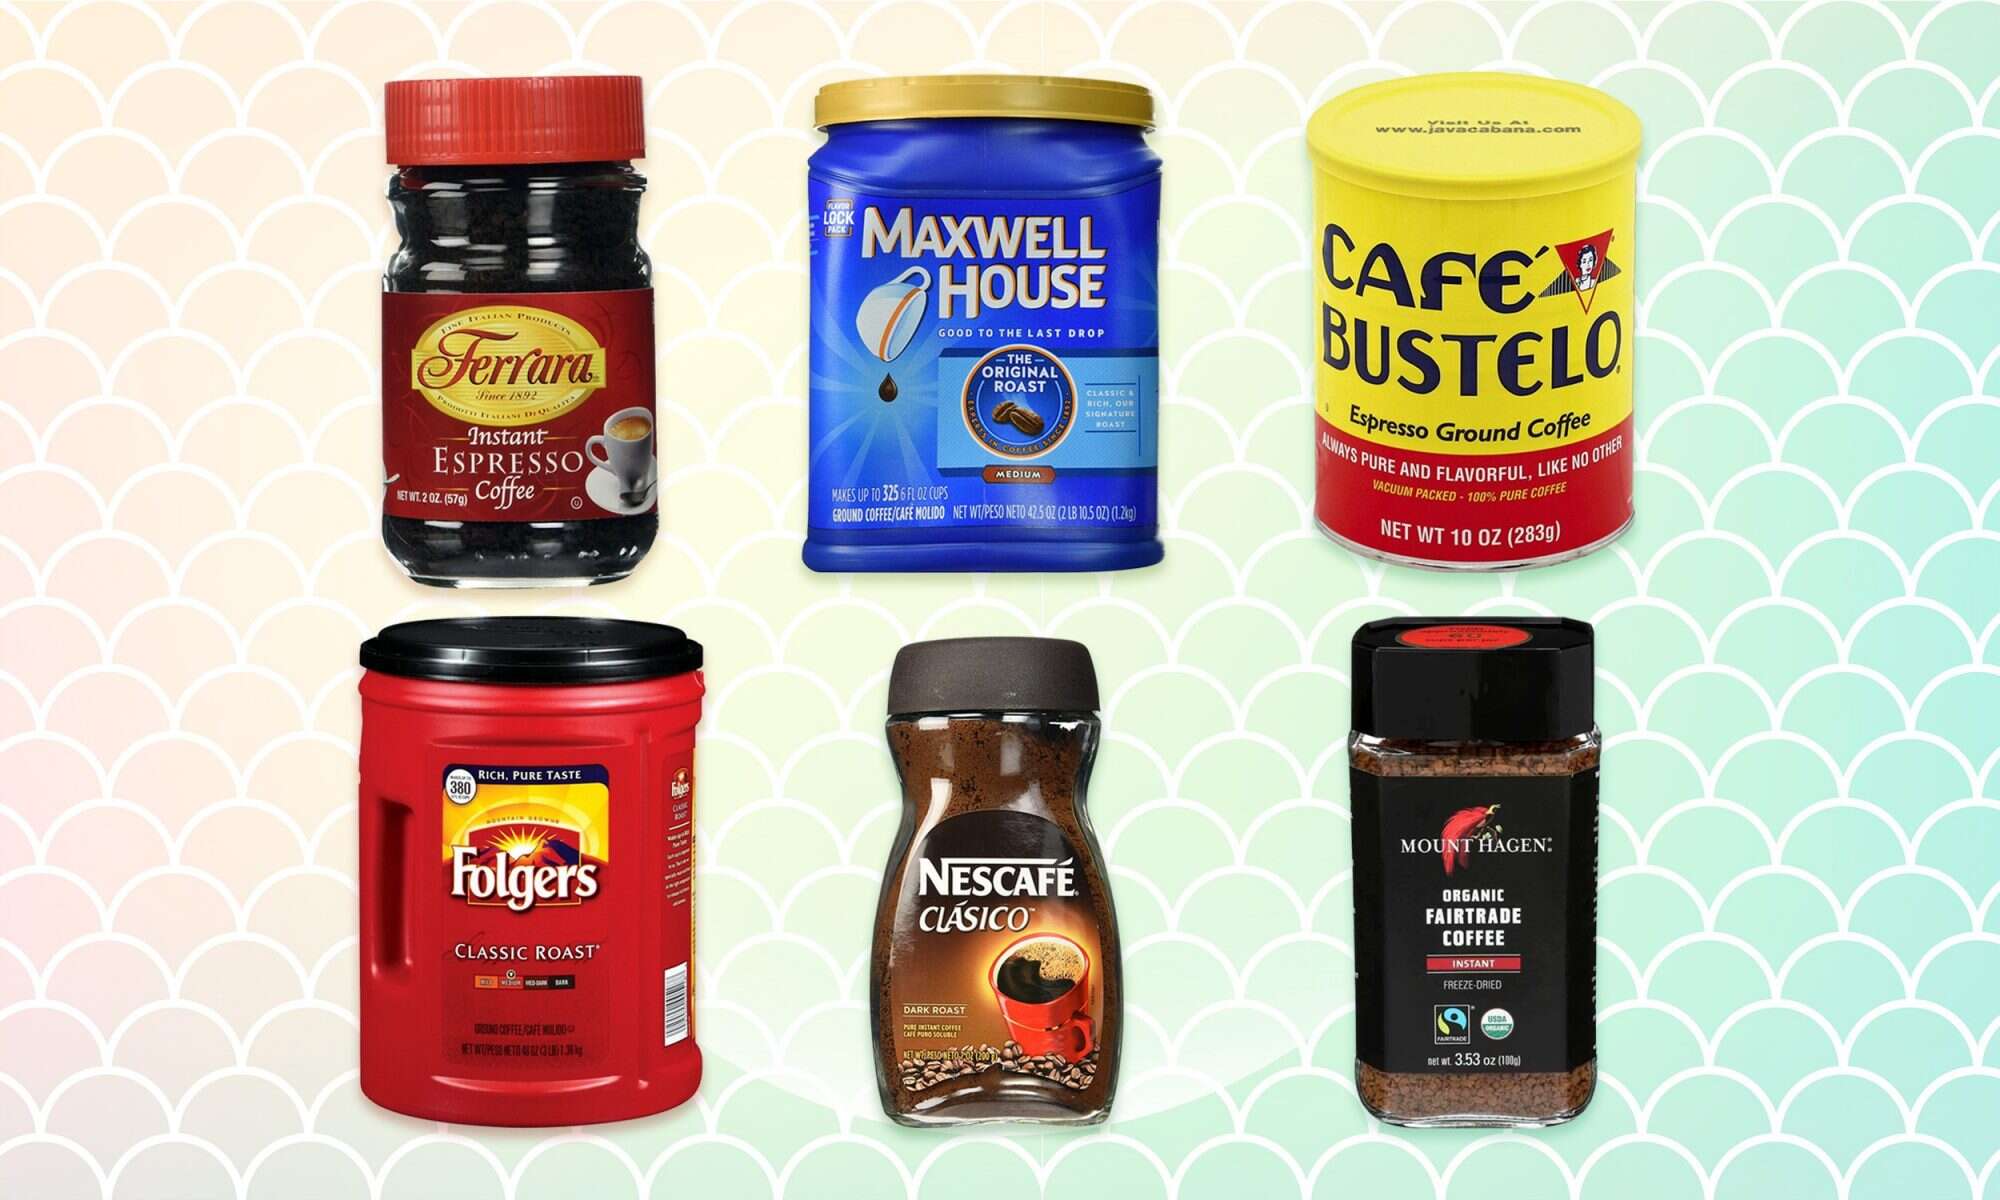 I Tried 6 Instant Coffees and Here's the Worst One